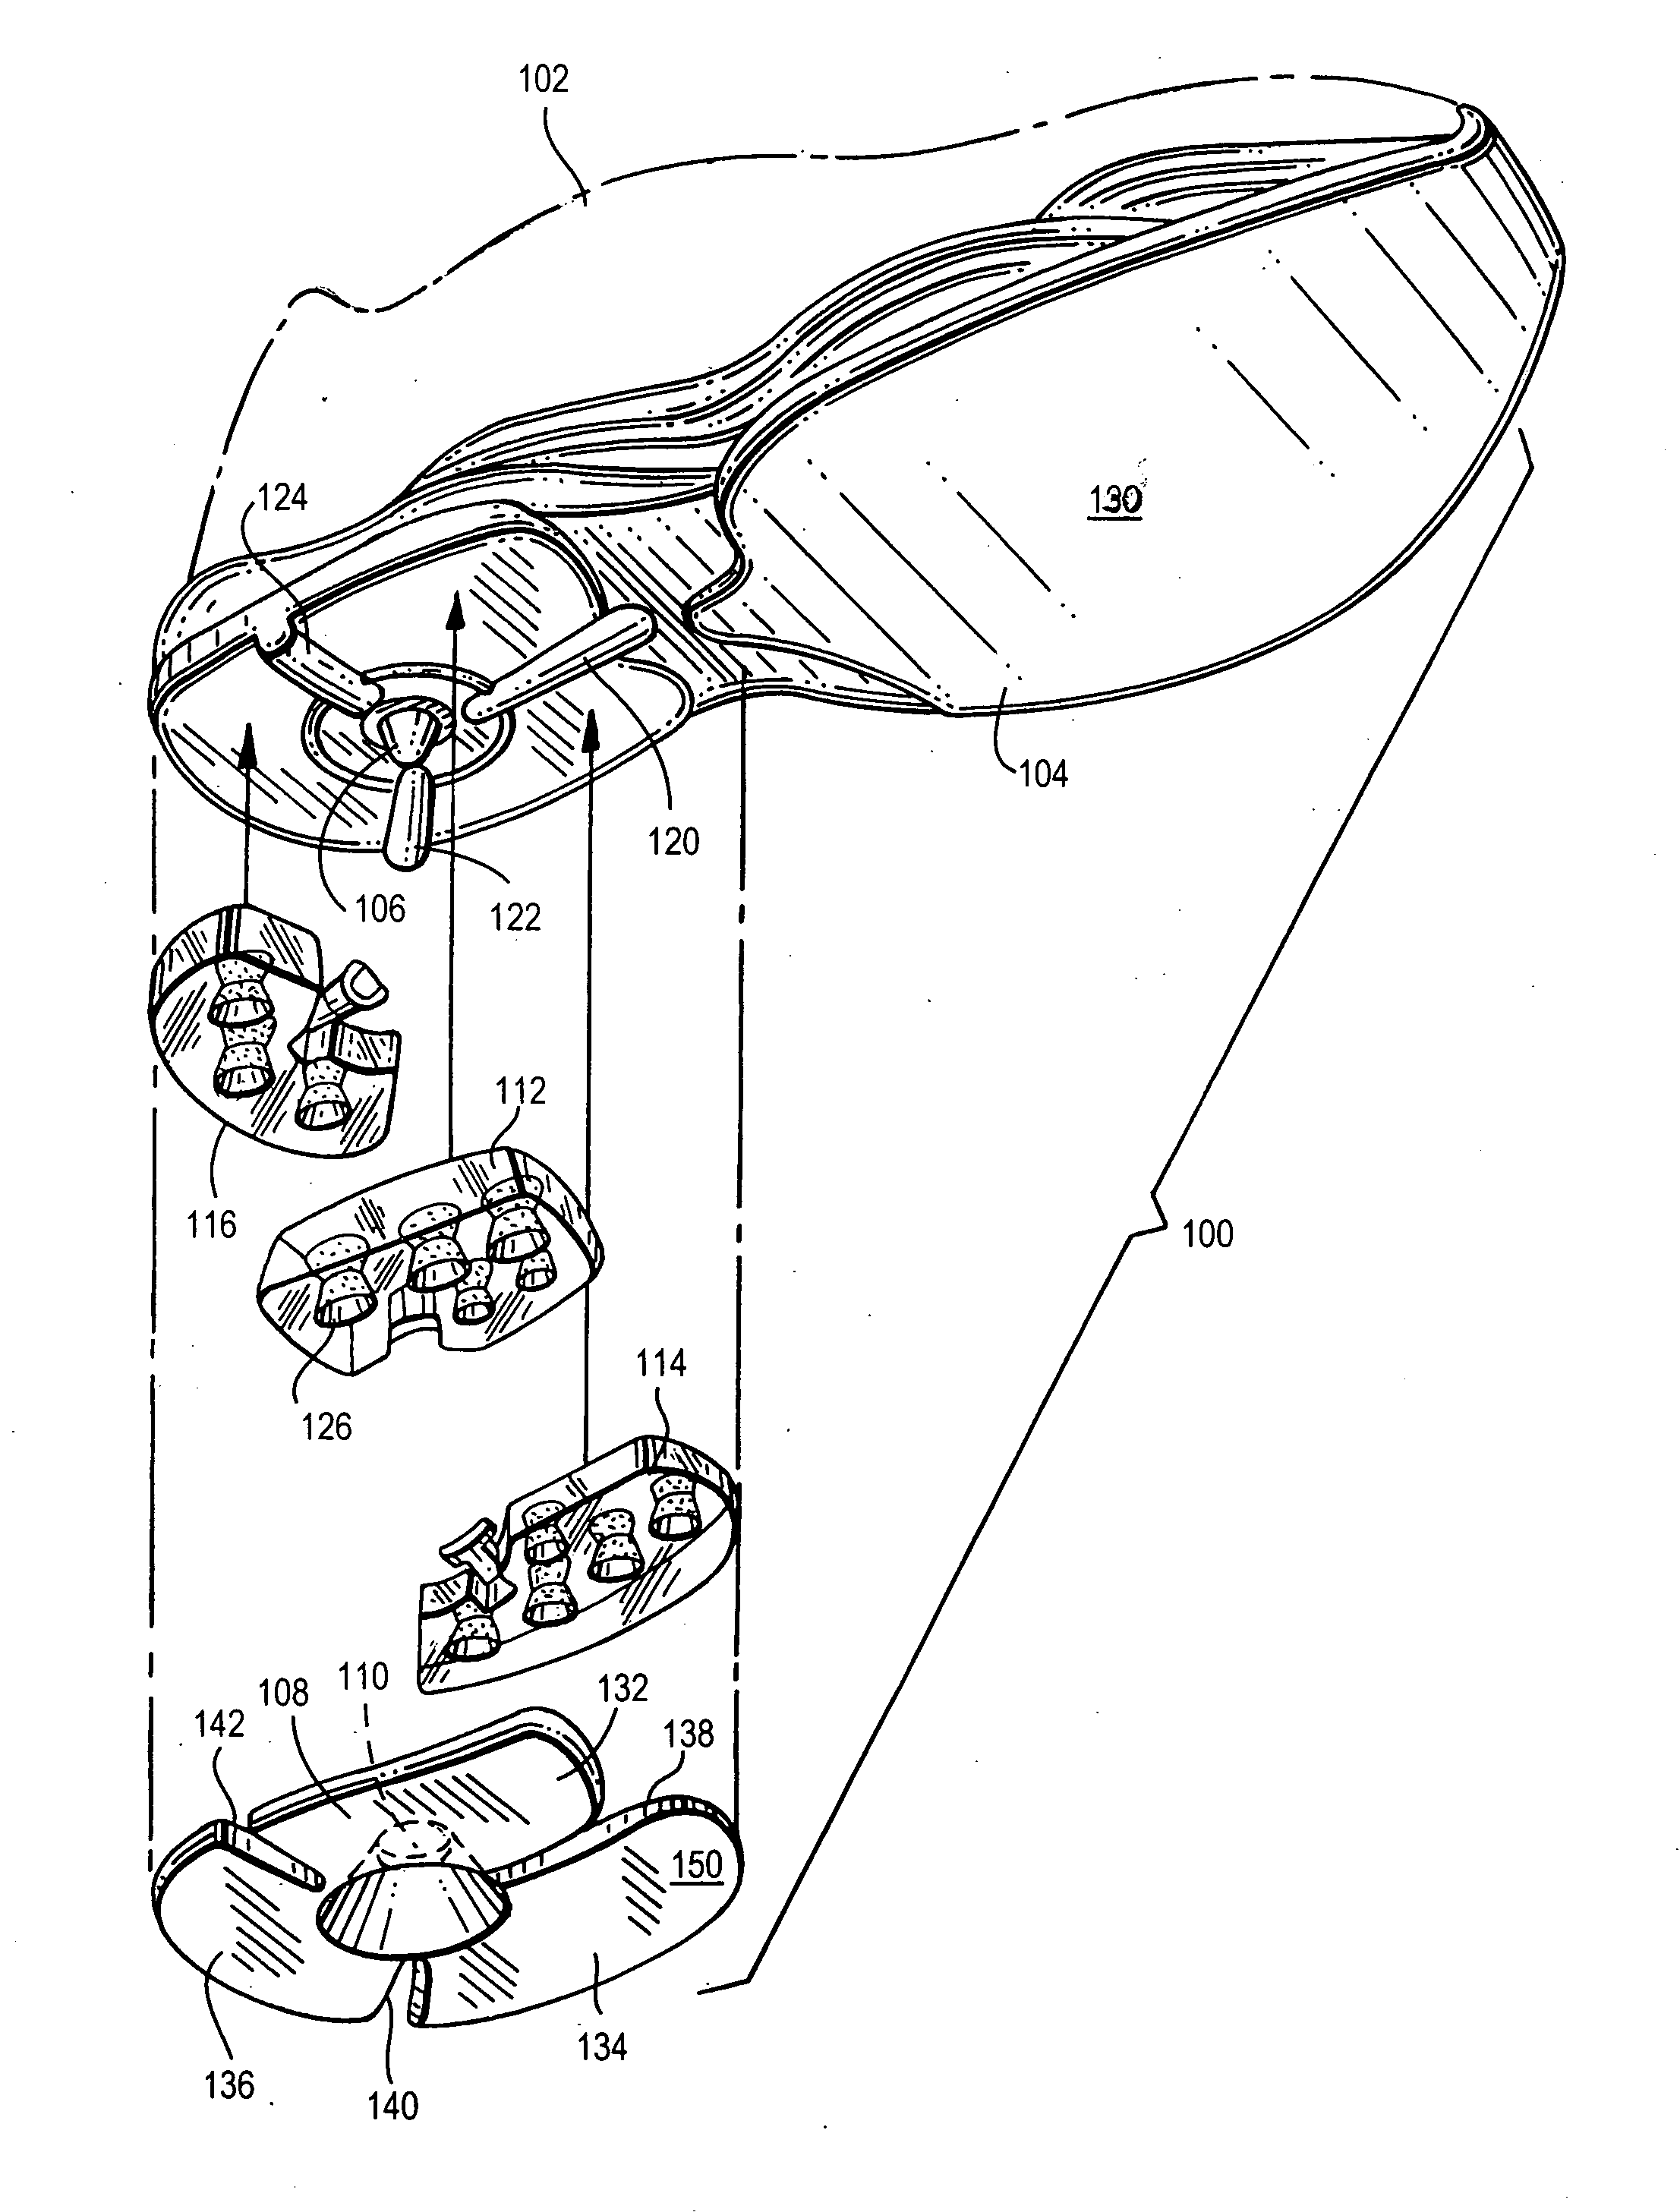 Shoe heel assembly and method